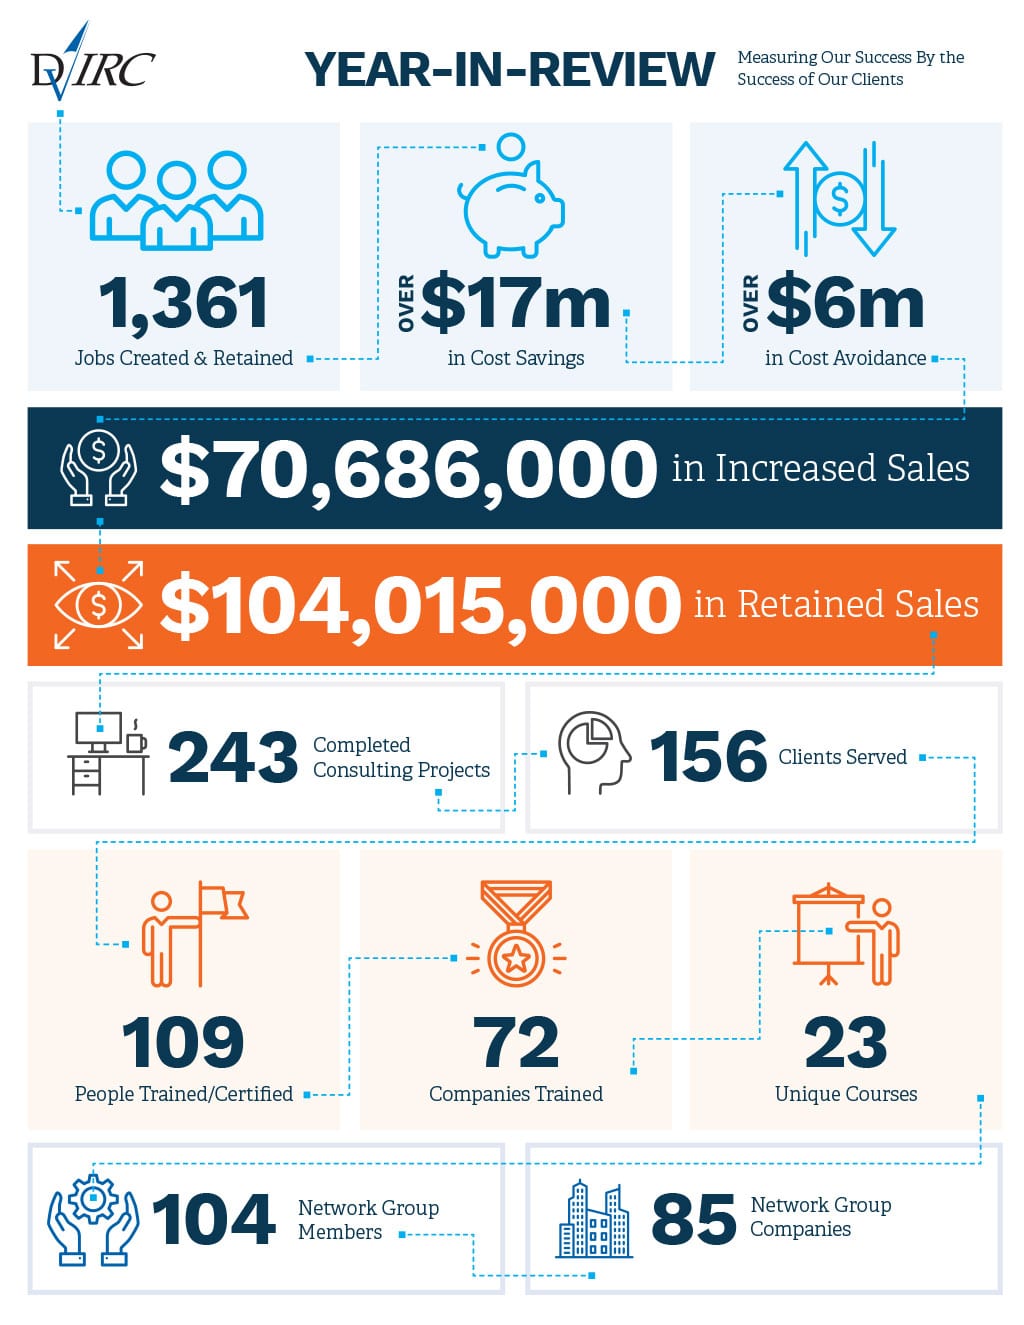 DVIRC 2019 Year In Review Infographic